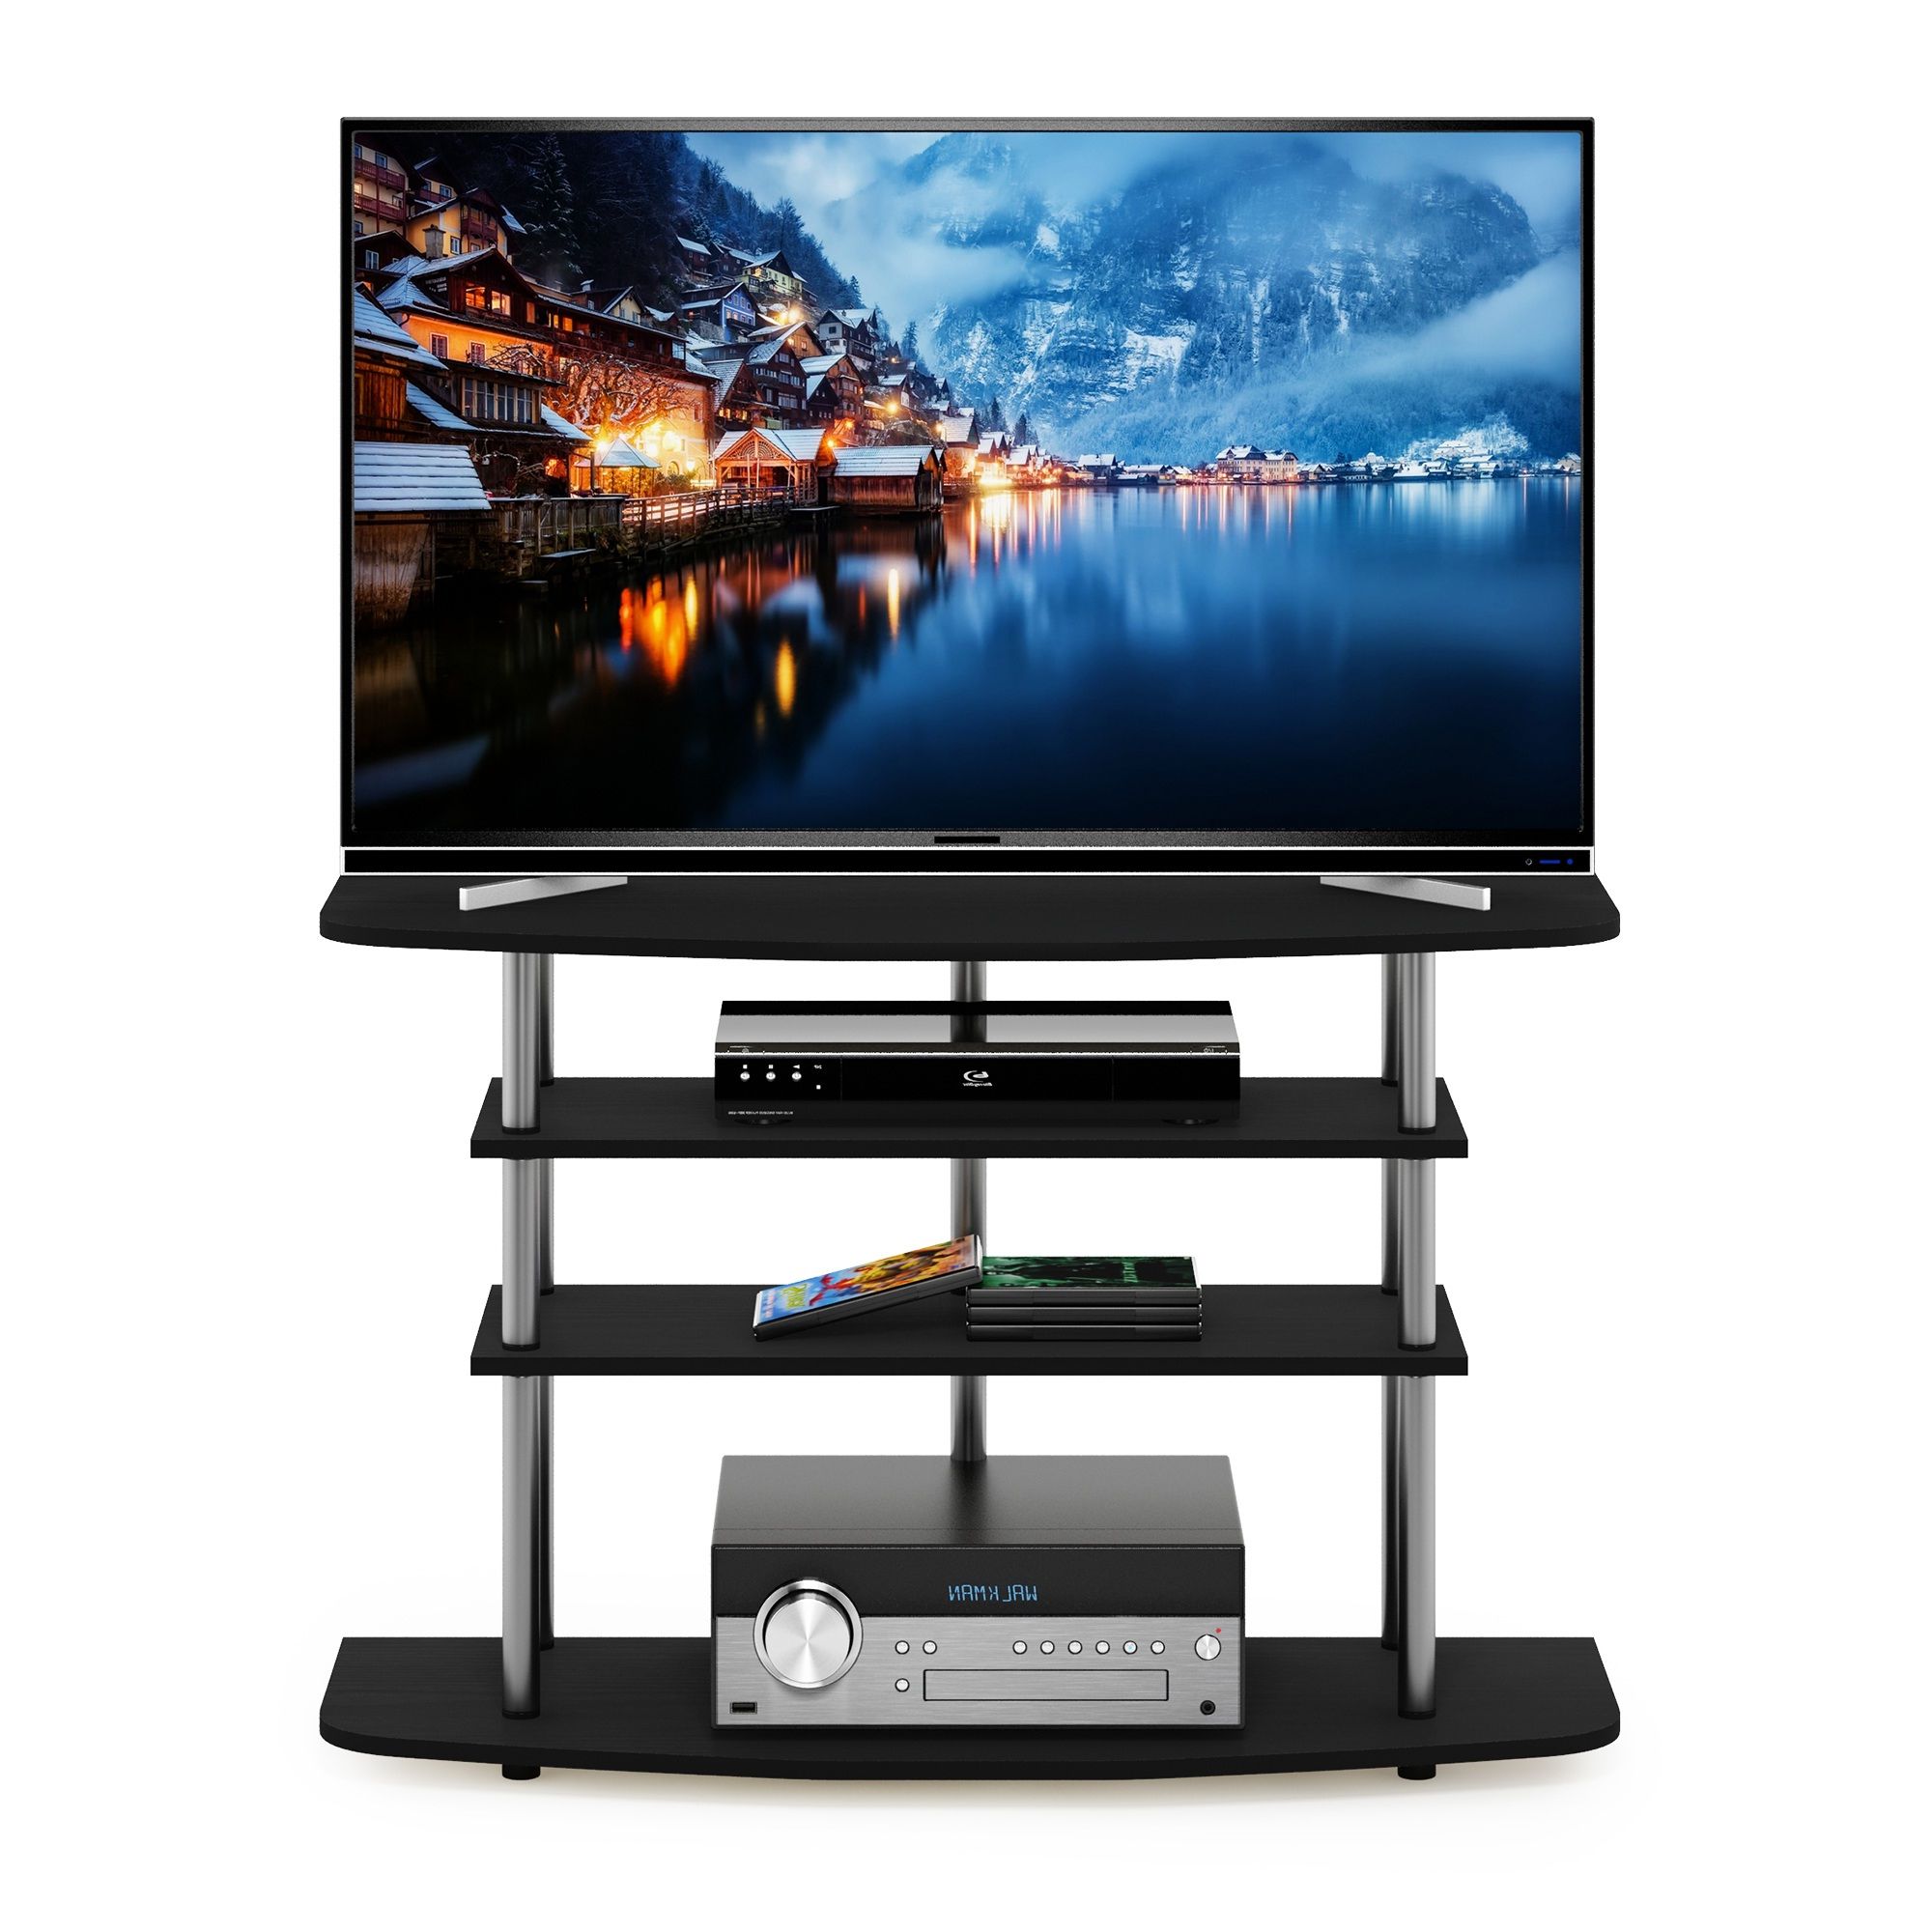 Furinno Frans Turn N Tube 4 Tier Tv Stand For Tv Up To 46 Within Furinno Jaya Large Tv Stands With Storage Bin (View 15 of 20)